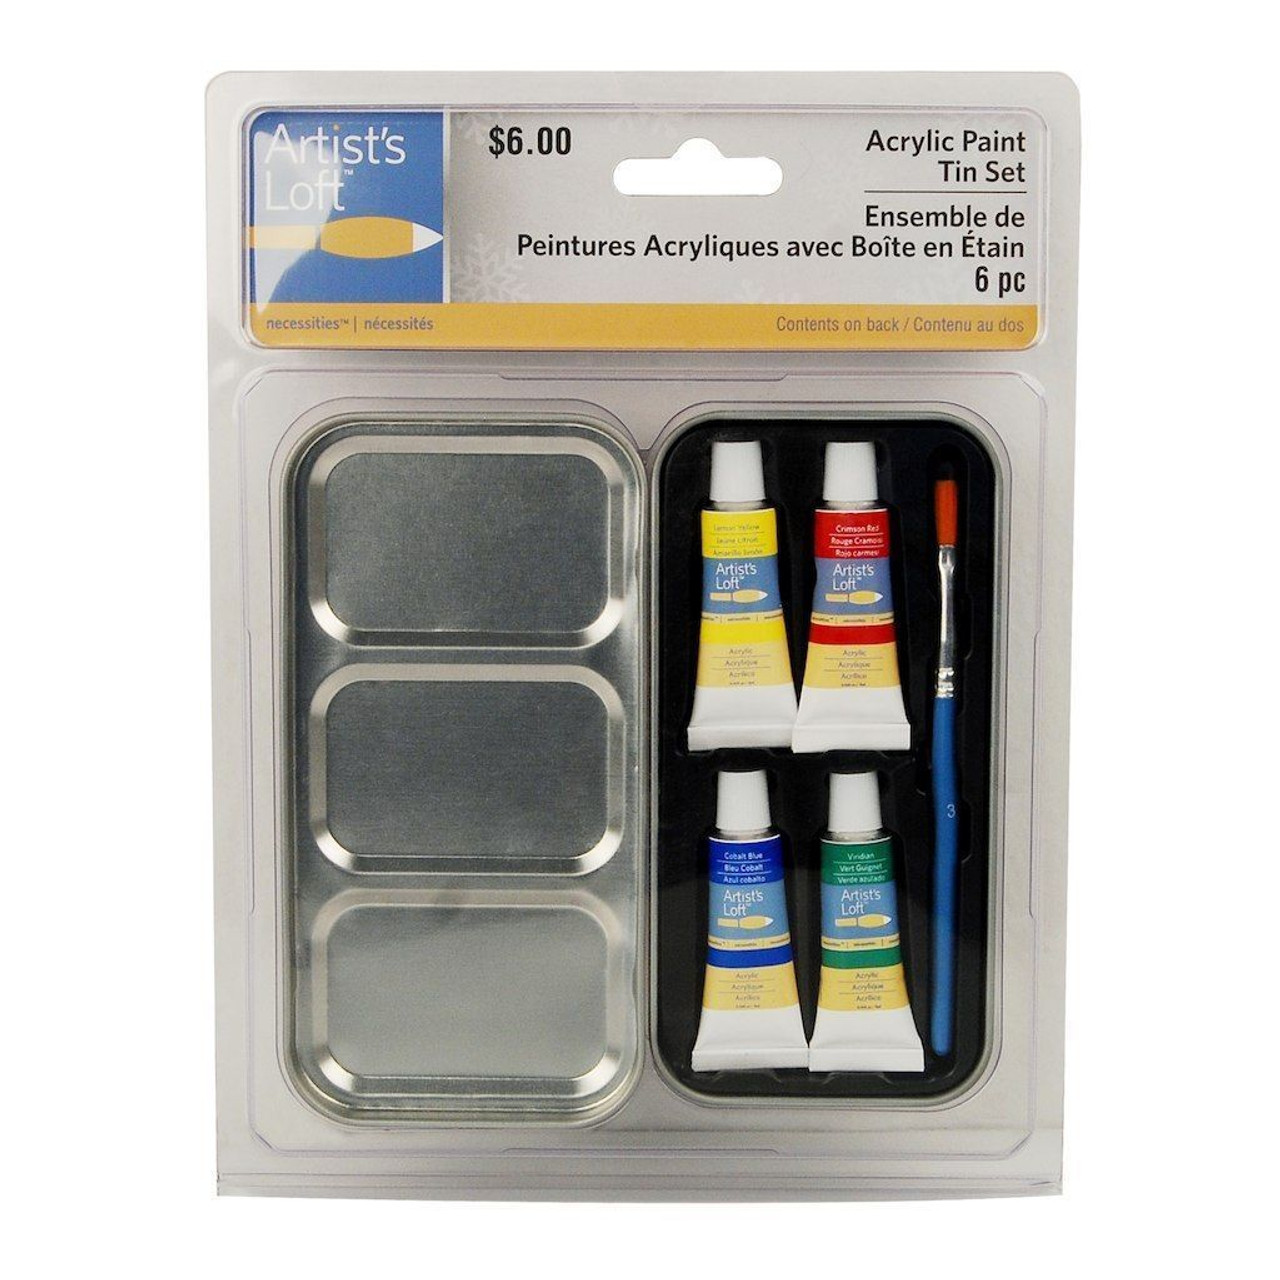 Acrylic Paint Tin Set Party Goodie Bag Gifts - FLS Discount Supplies